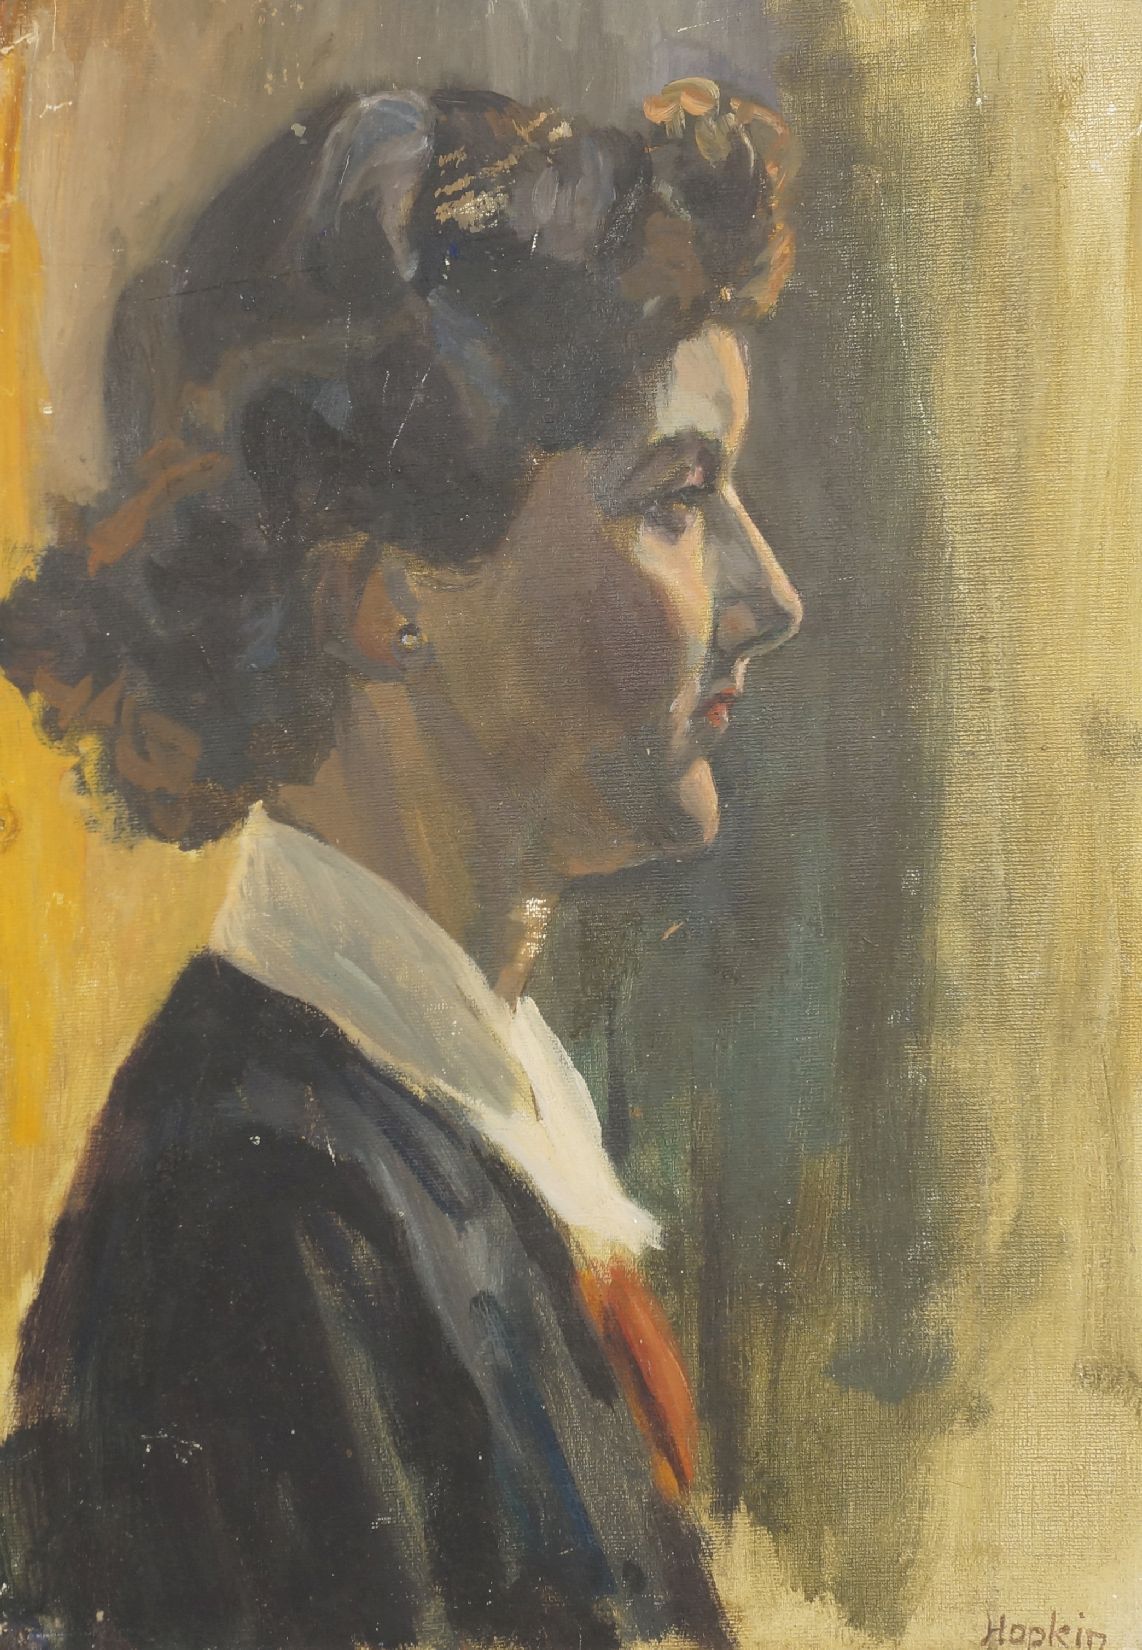 Hopkin, British school, mid-20th century- Portrait of a woman in profile, turned to the right; oil